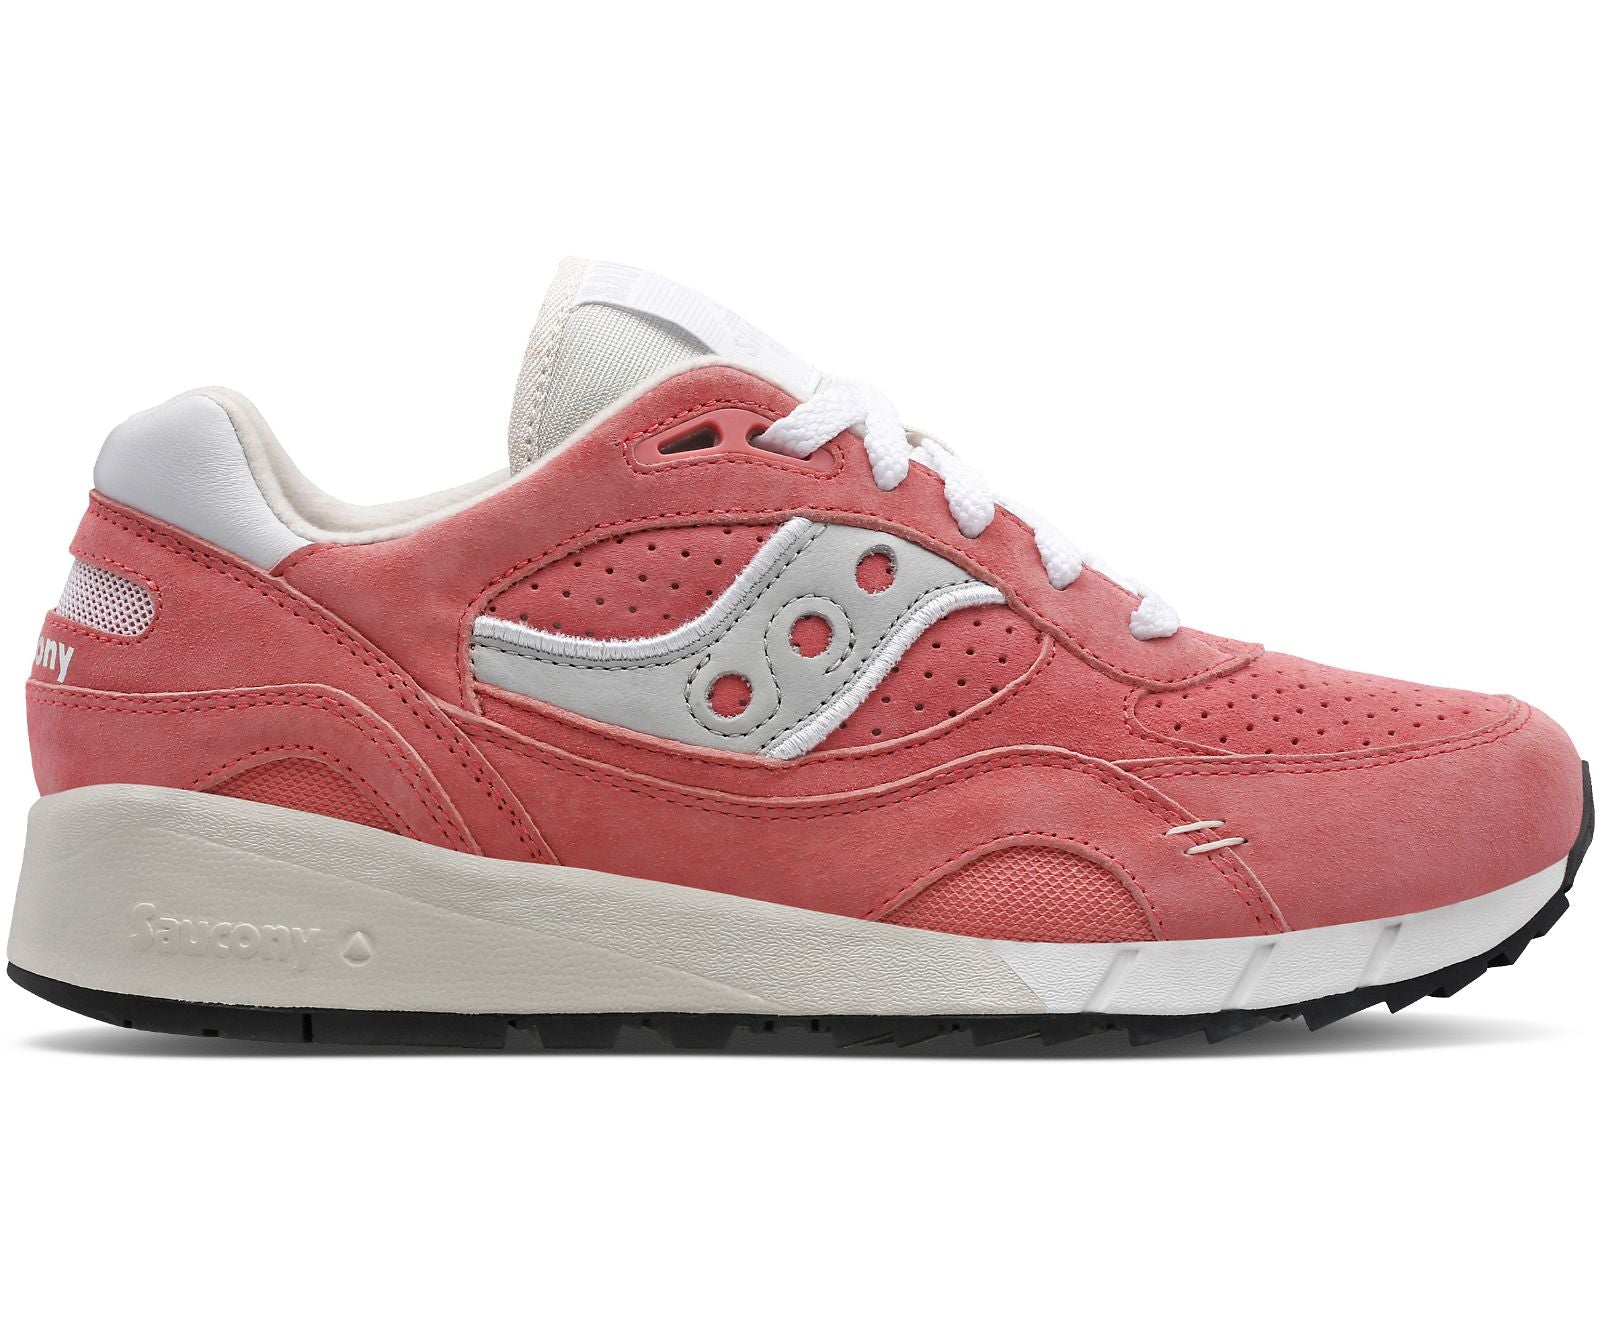 The Women's Shadow 6000 from Saucony features a bold new colorway, lending itself to spring summer style with bright vibrancy. Saturated hues of salmon make a statement in eye-catching shades. Premium suede overlays and perforate suede base adds a luxe feel to the collection. Contrasting the white sole unit from the upper, creates a tonal look that pops.